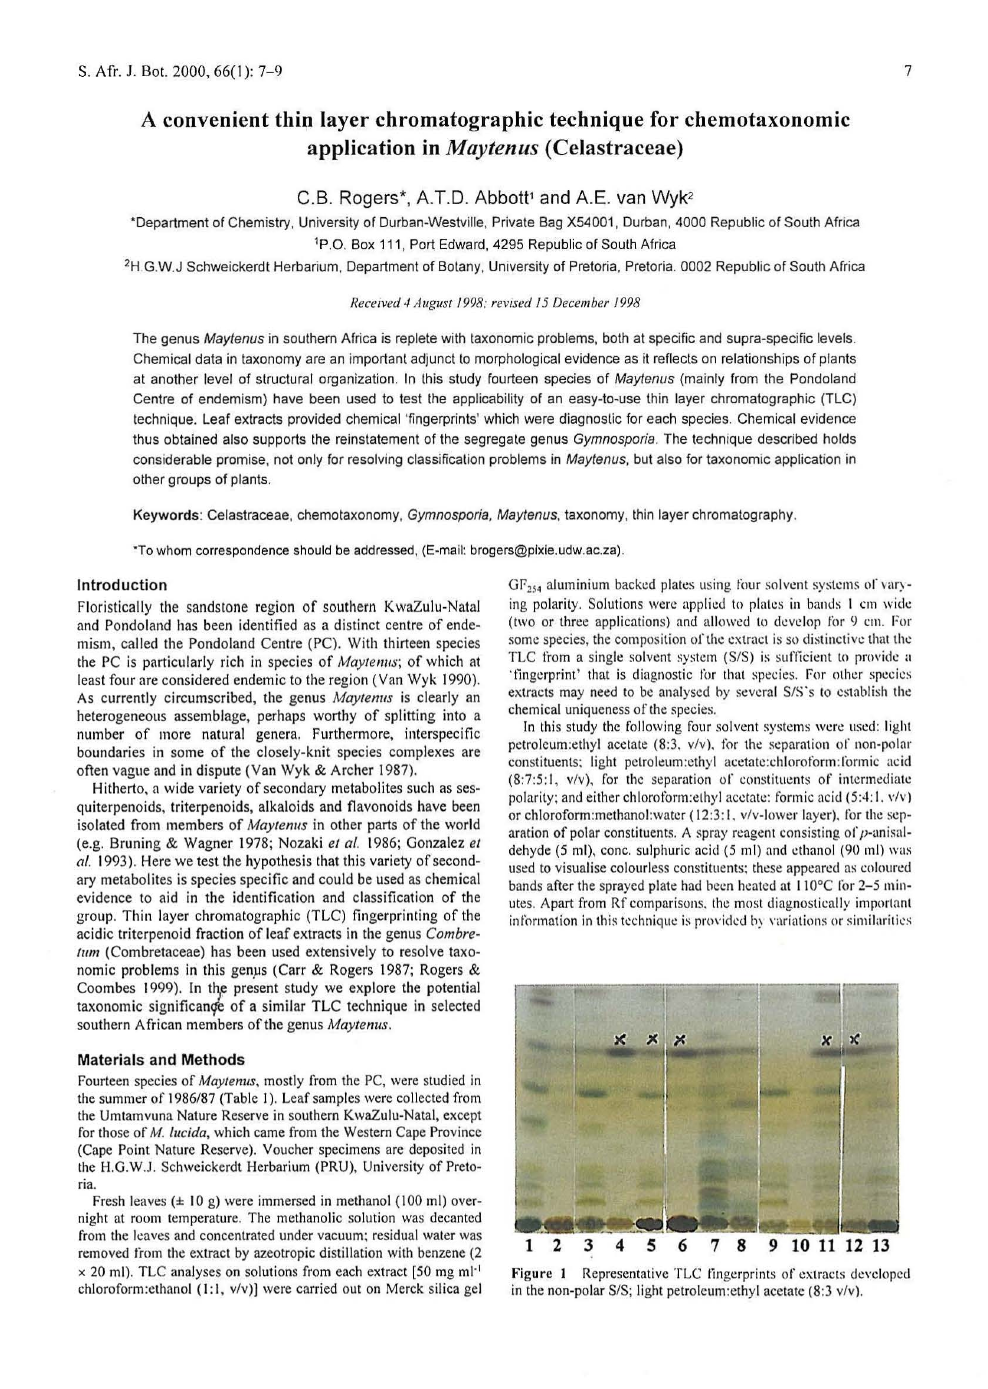 A Convenient Thin Layer Chromatographic Technique For Chemotaxonomic Application In Maytenus Celastraceae Topic Of Research Paper In Biological Sciences Download Scholarly Article Pdf And Read For Free On Cyberleninka Open Science